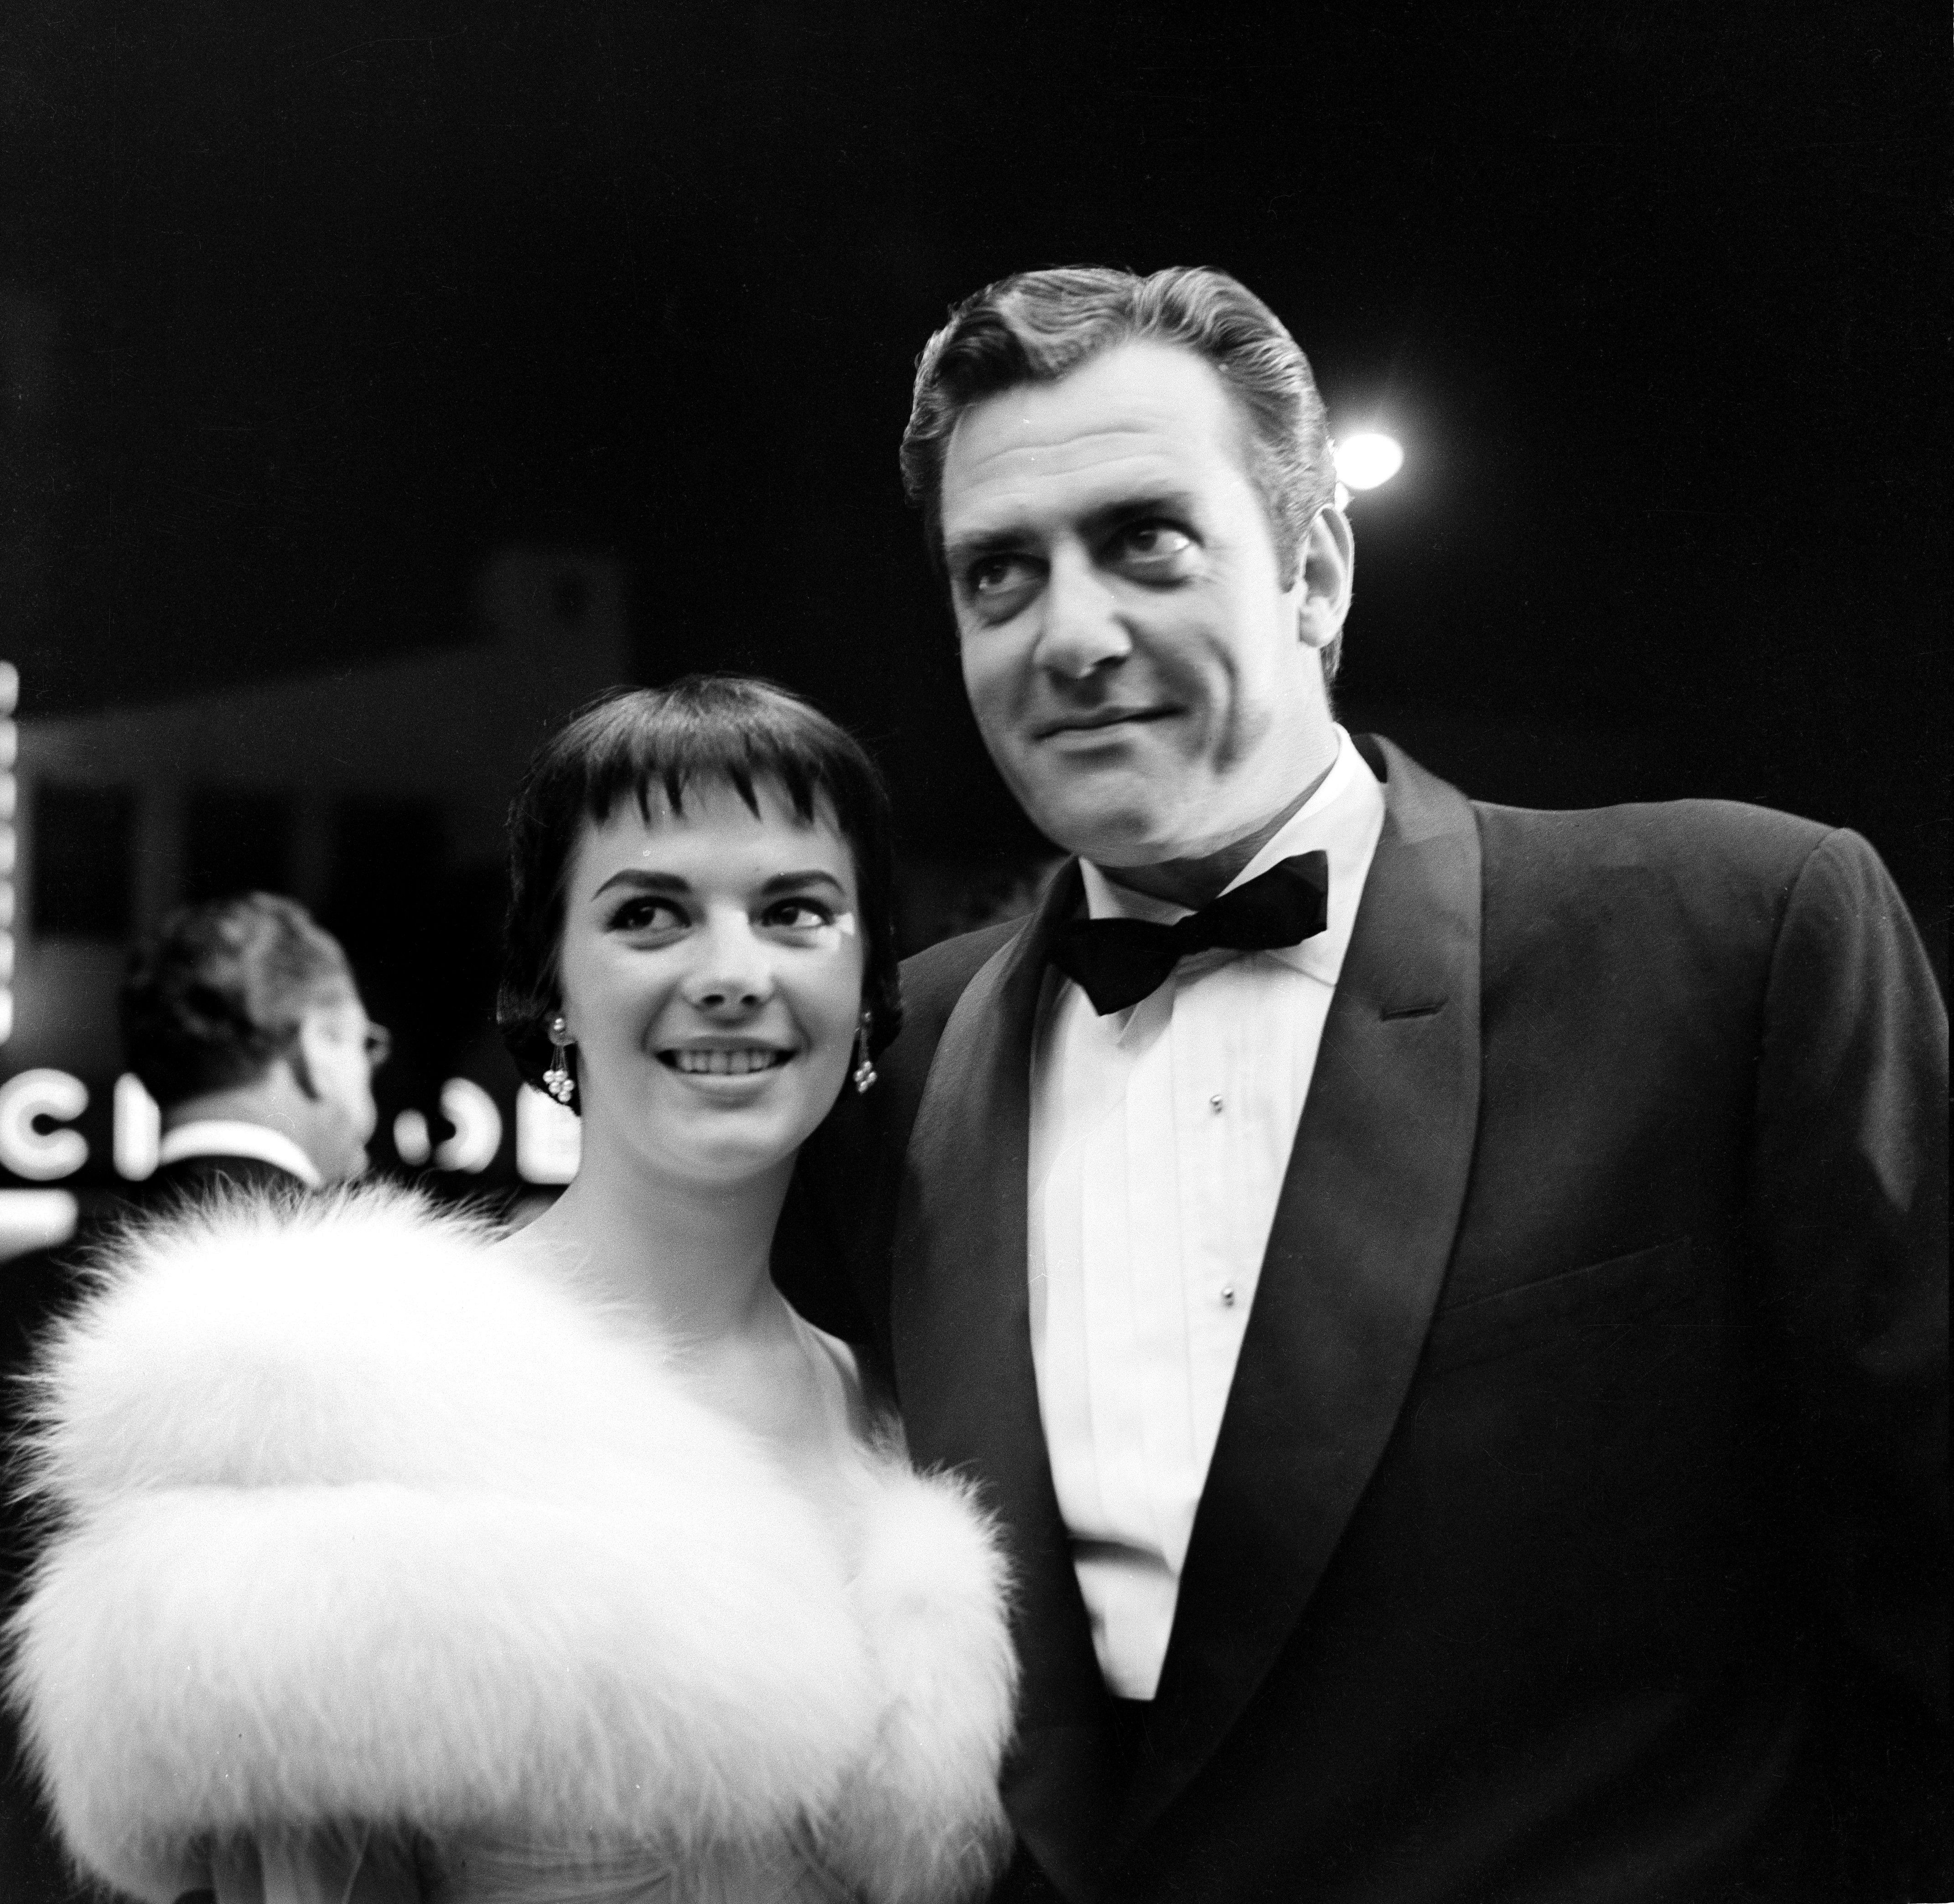 Actress Natalie Wood with actor Raymond Burr at the premiere of "A Cry in the Night" in Los Angeles,CA. | Source: Getty Images